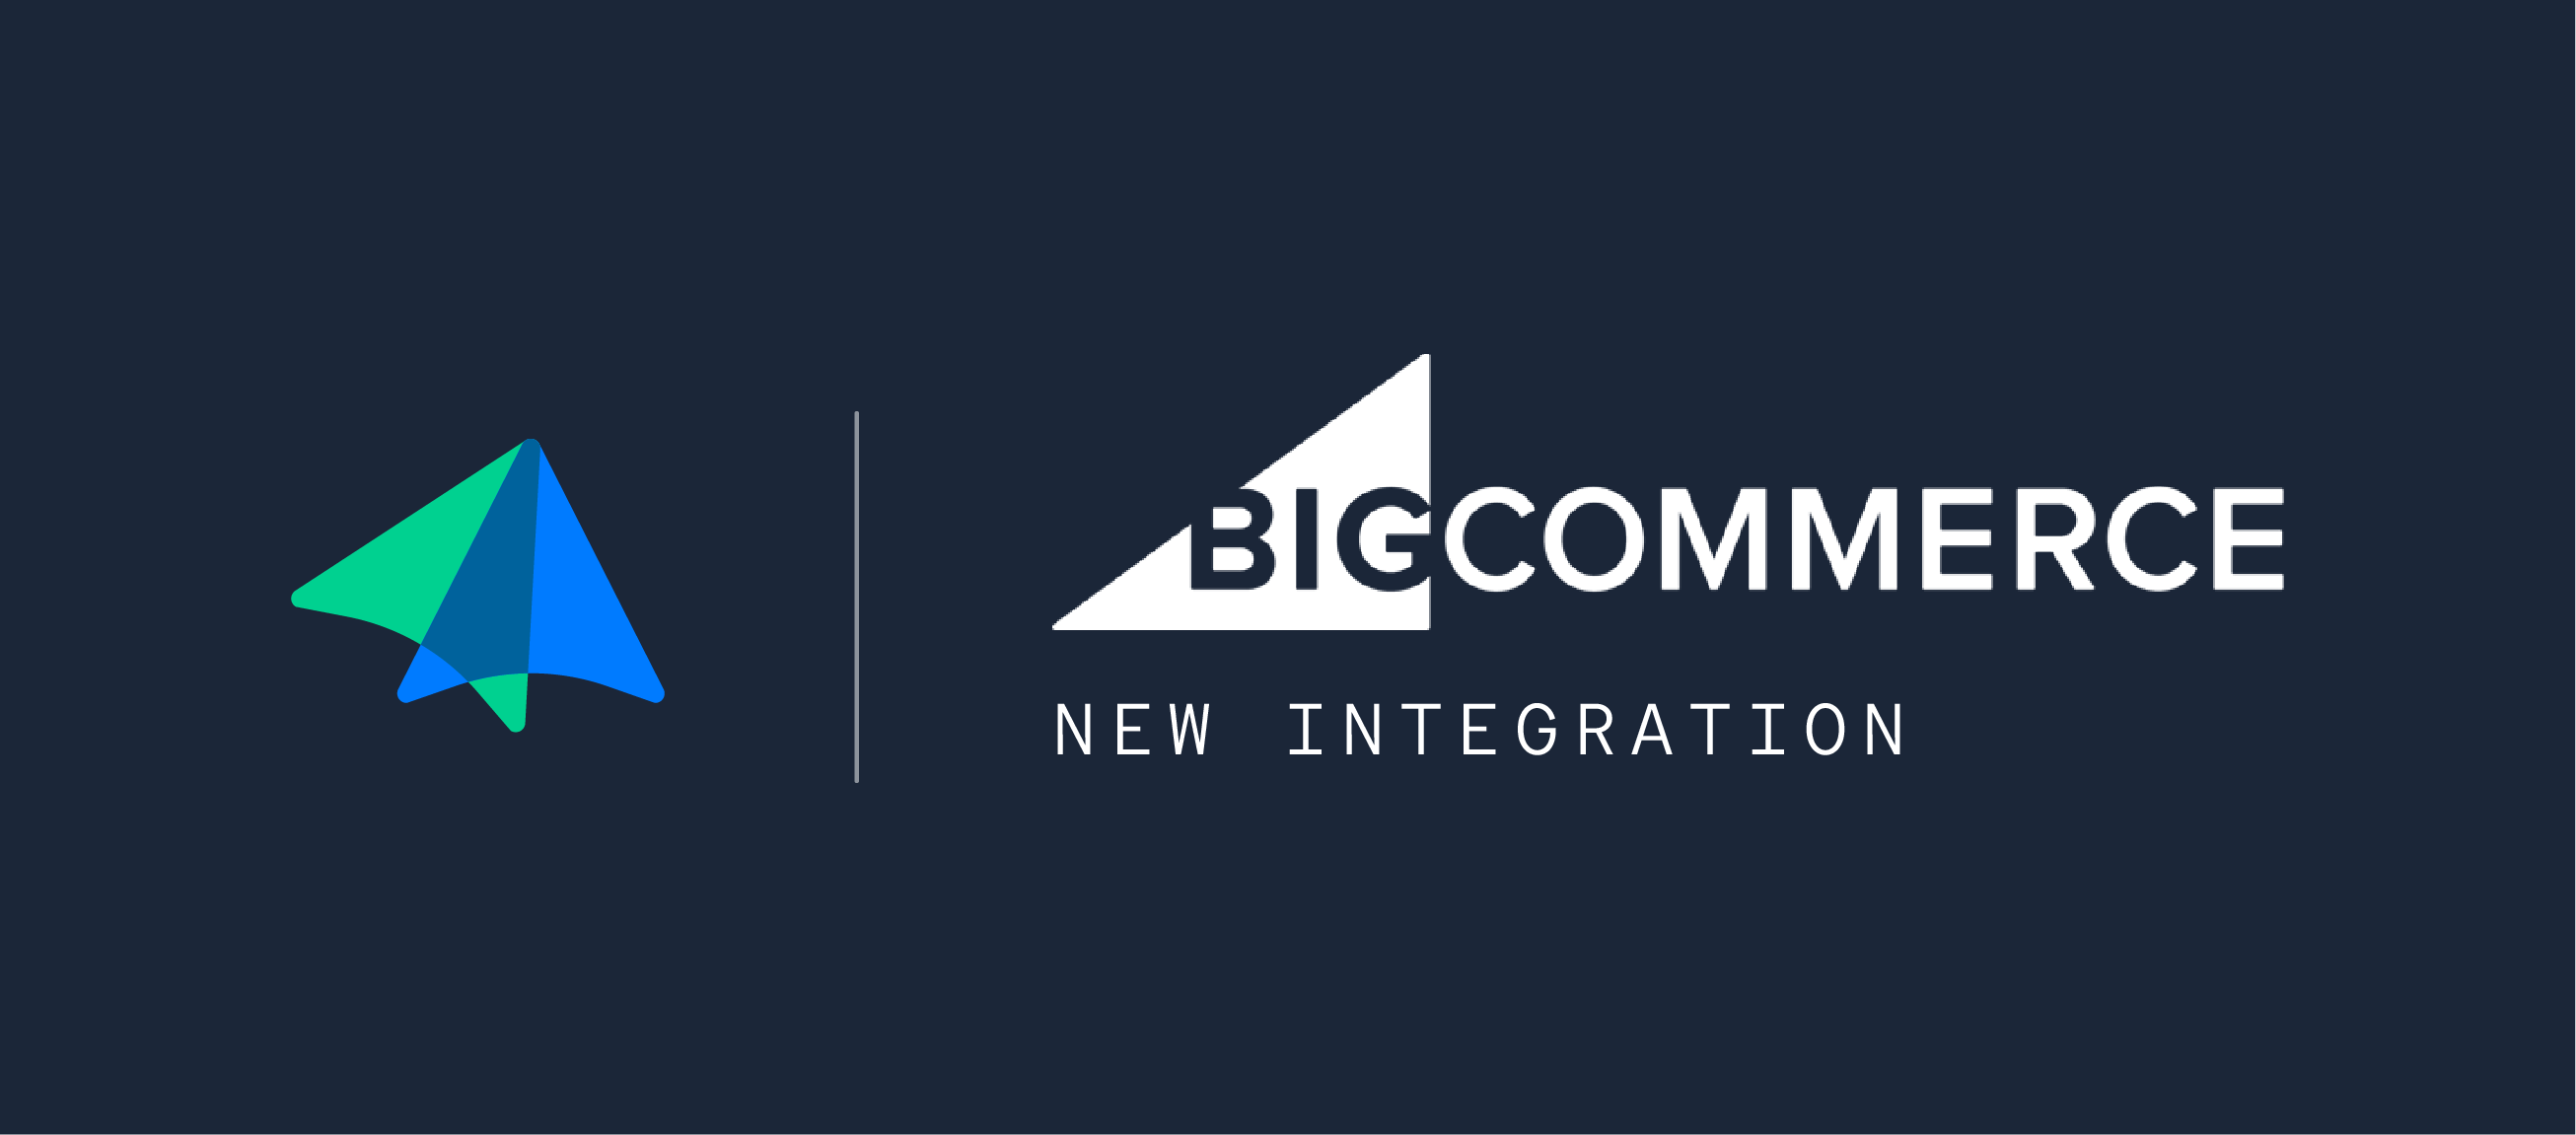 Logik.io Joins the BigCommerce Marketplace as Product Configuration & Guided Selling Partner